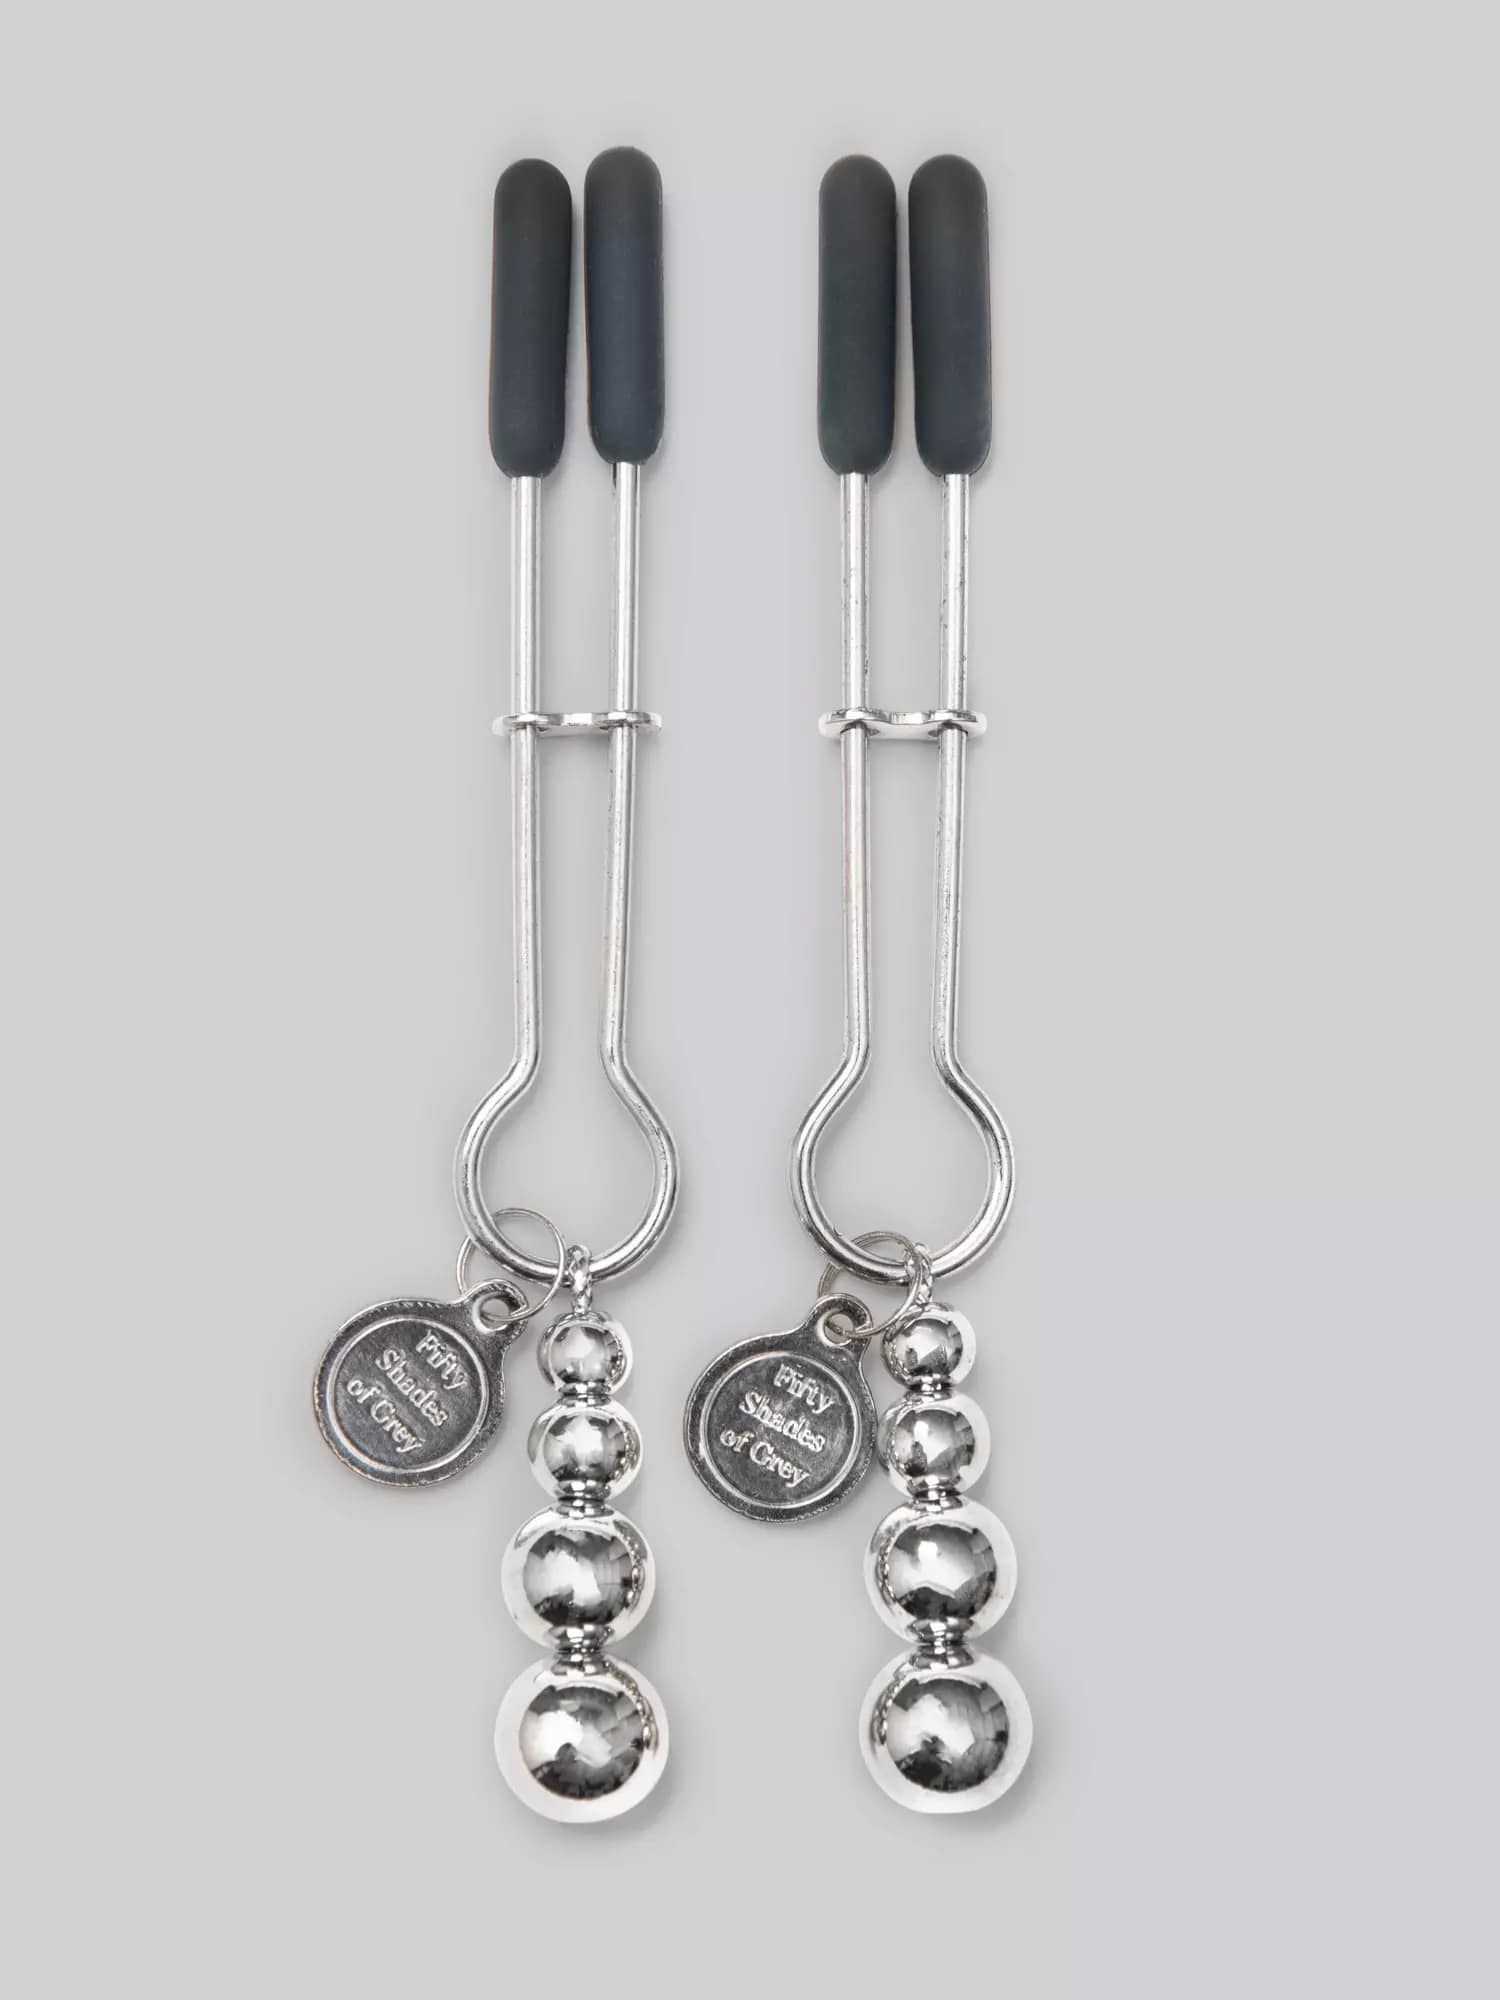 Fifty Shades of Grey Adjustable Nipple Clamps. Slide 19